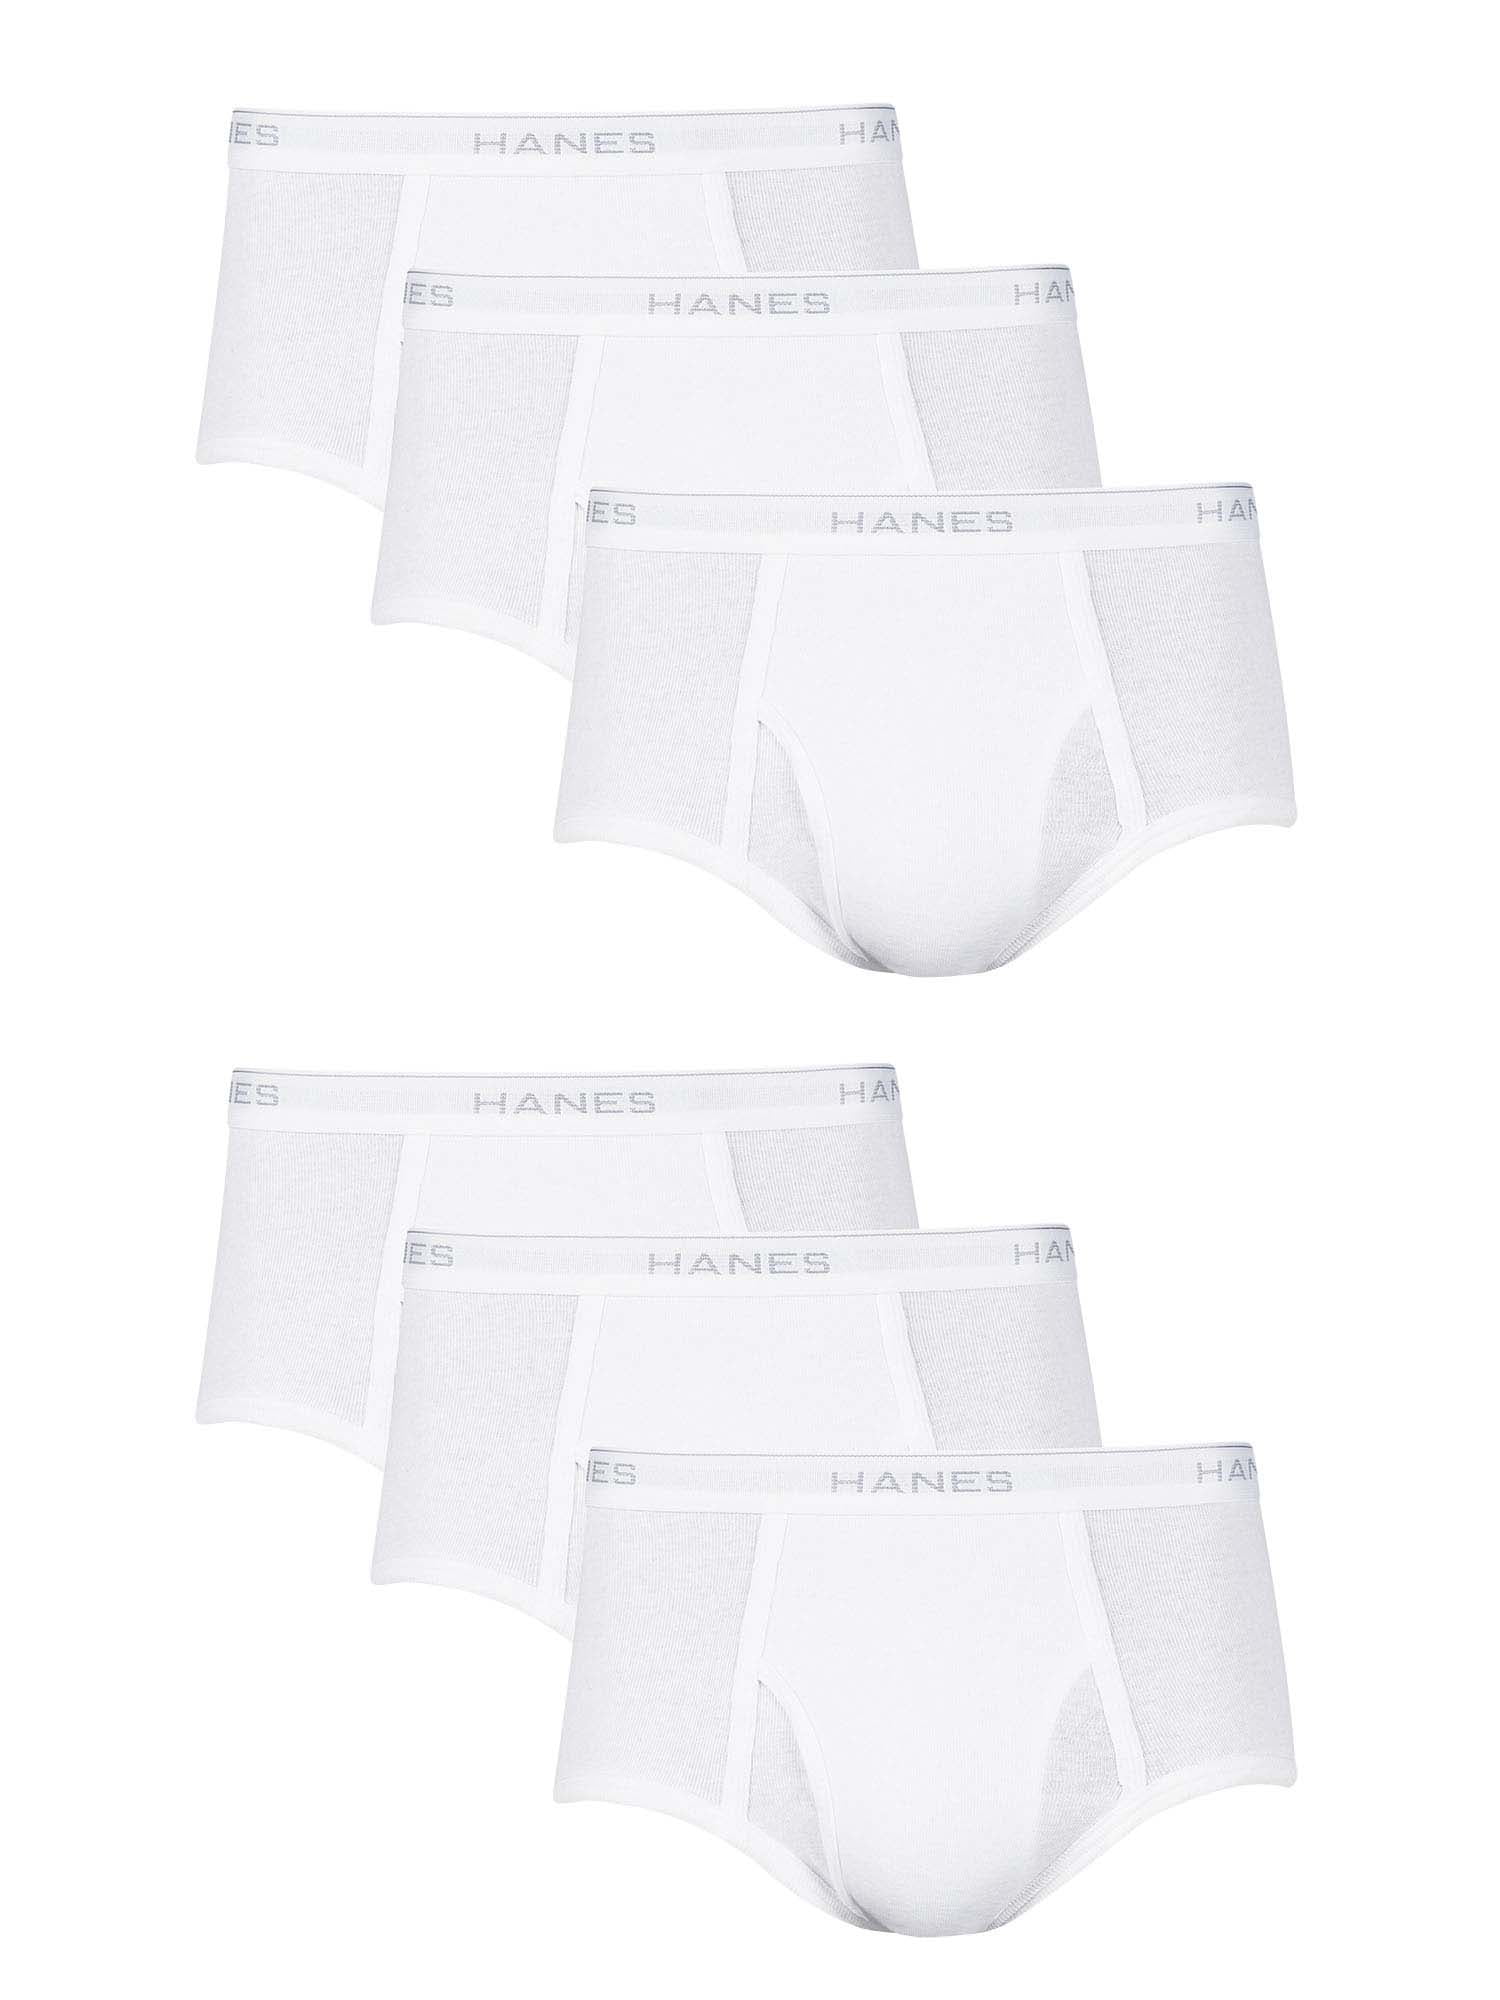 Hanes Mens 6-Pack Tagless No Ride Up Briefs with ComfortSoft Waistband